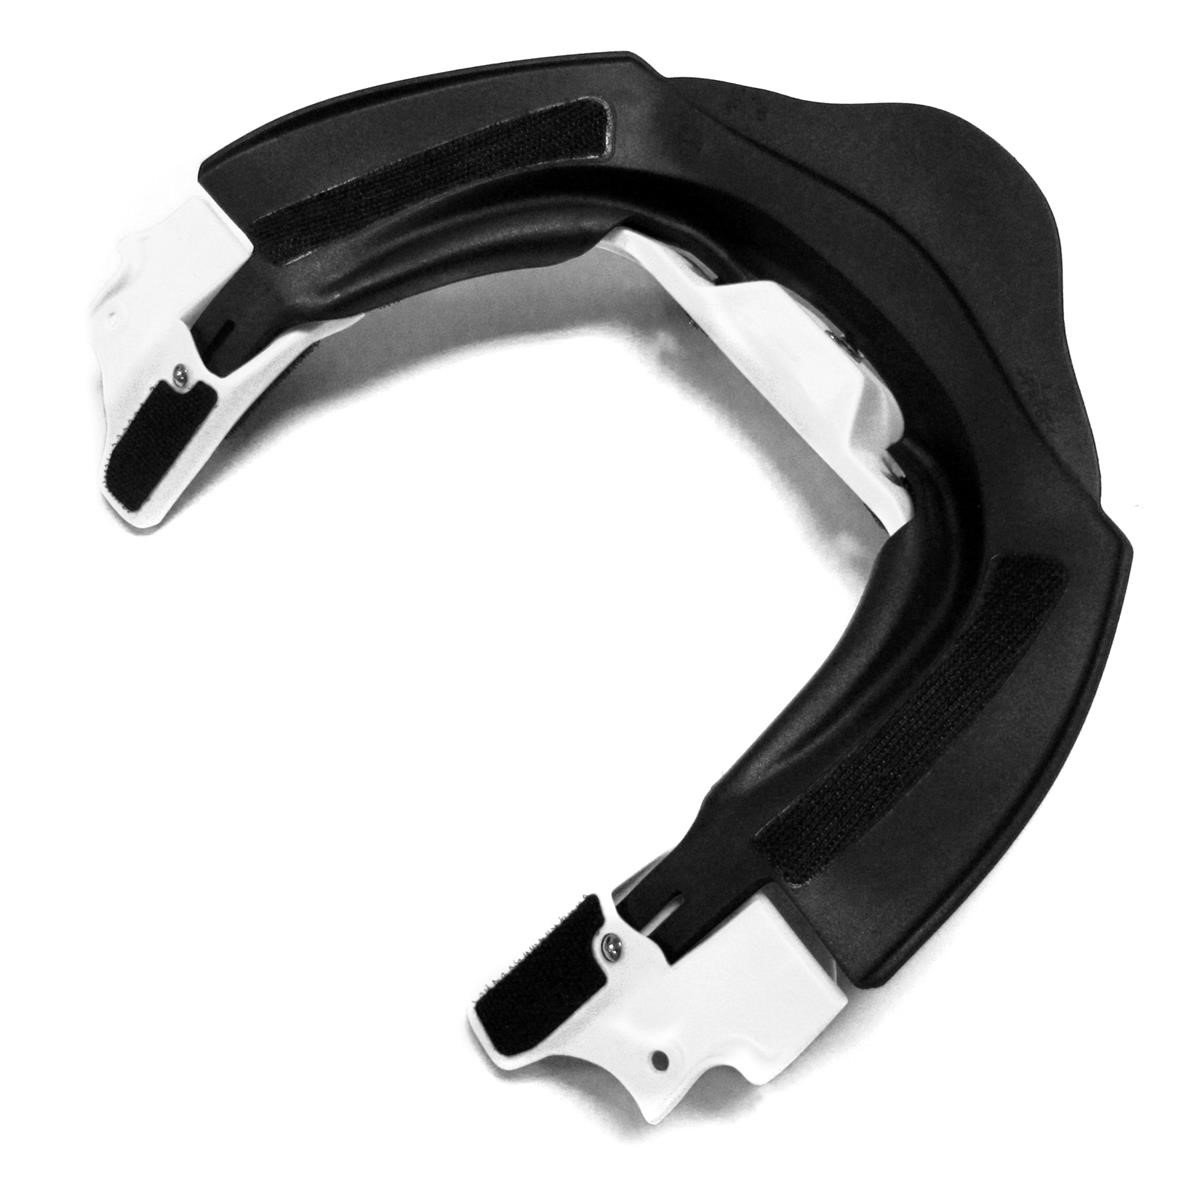 Leatt Replacement Part for Neck Brace GPX Adventure III Back Brace Pack White - back